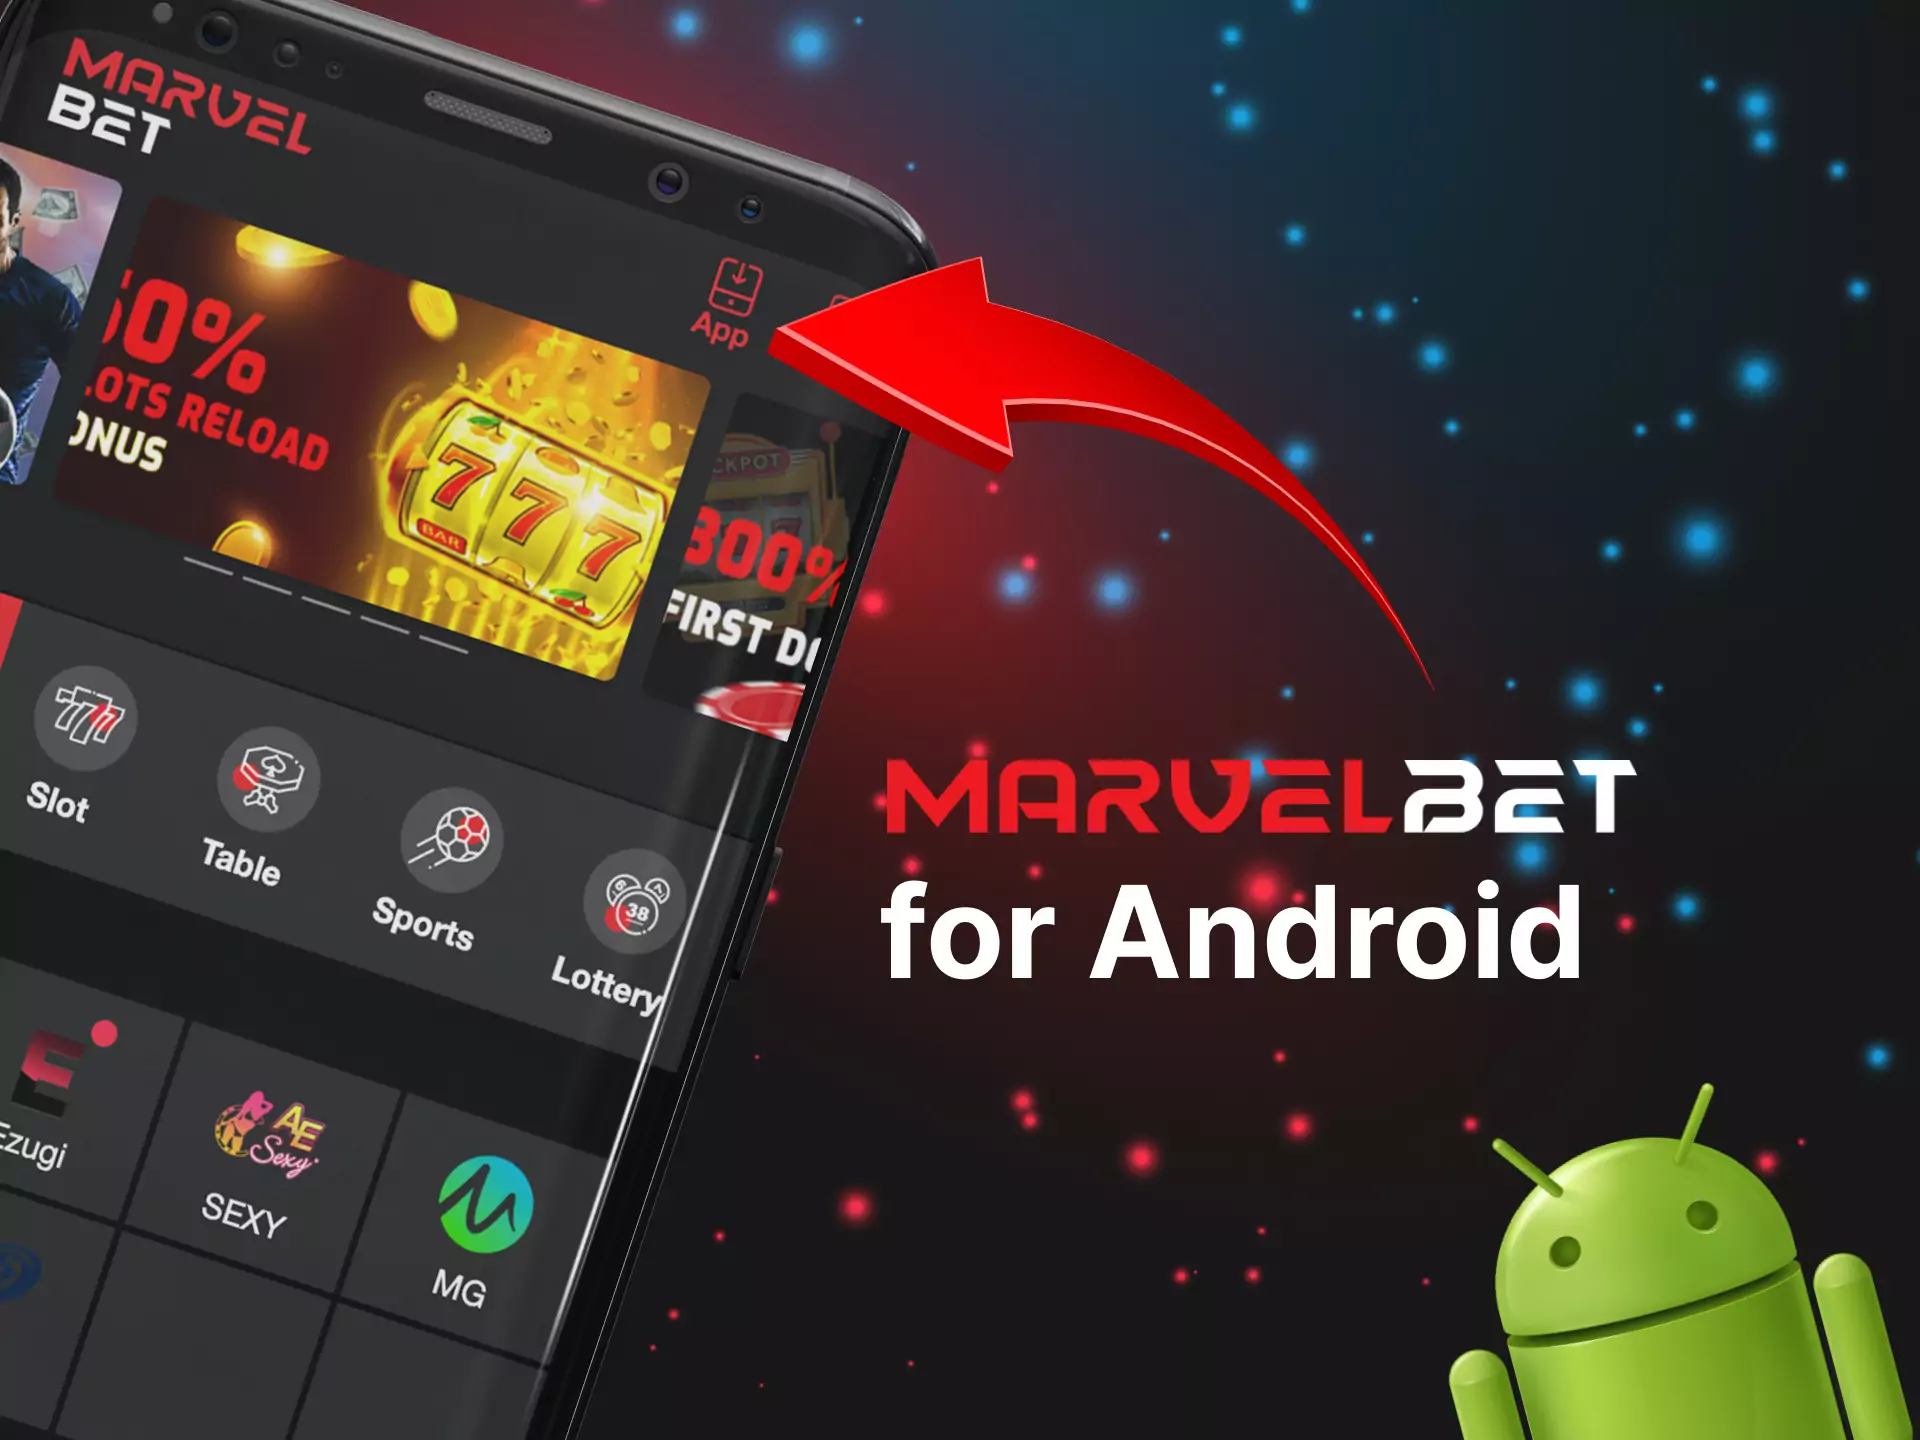 Click on the icon at the top of the homepage to start downloading the Marvelbet apk file.